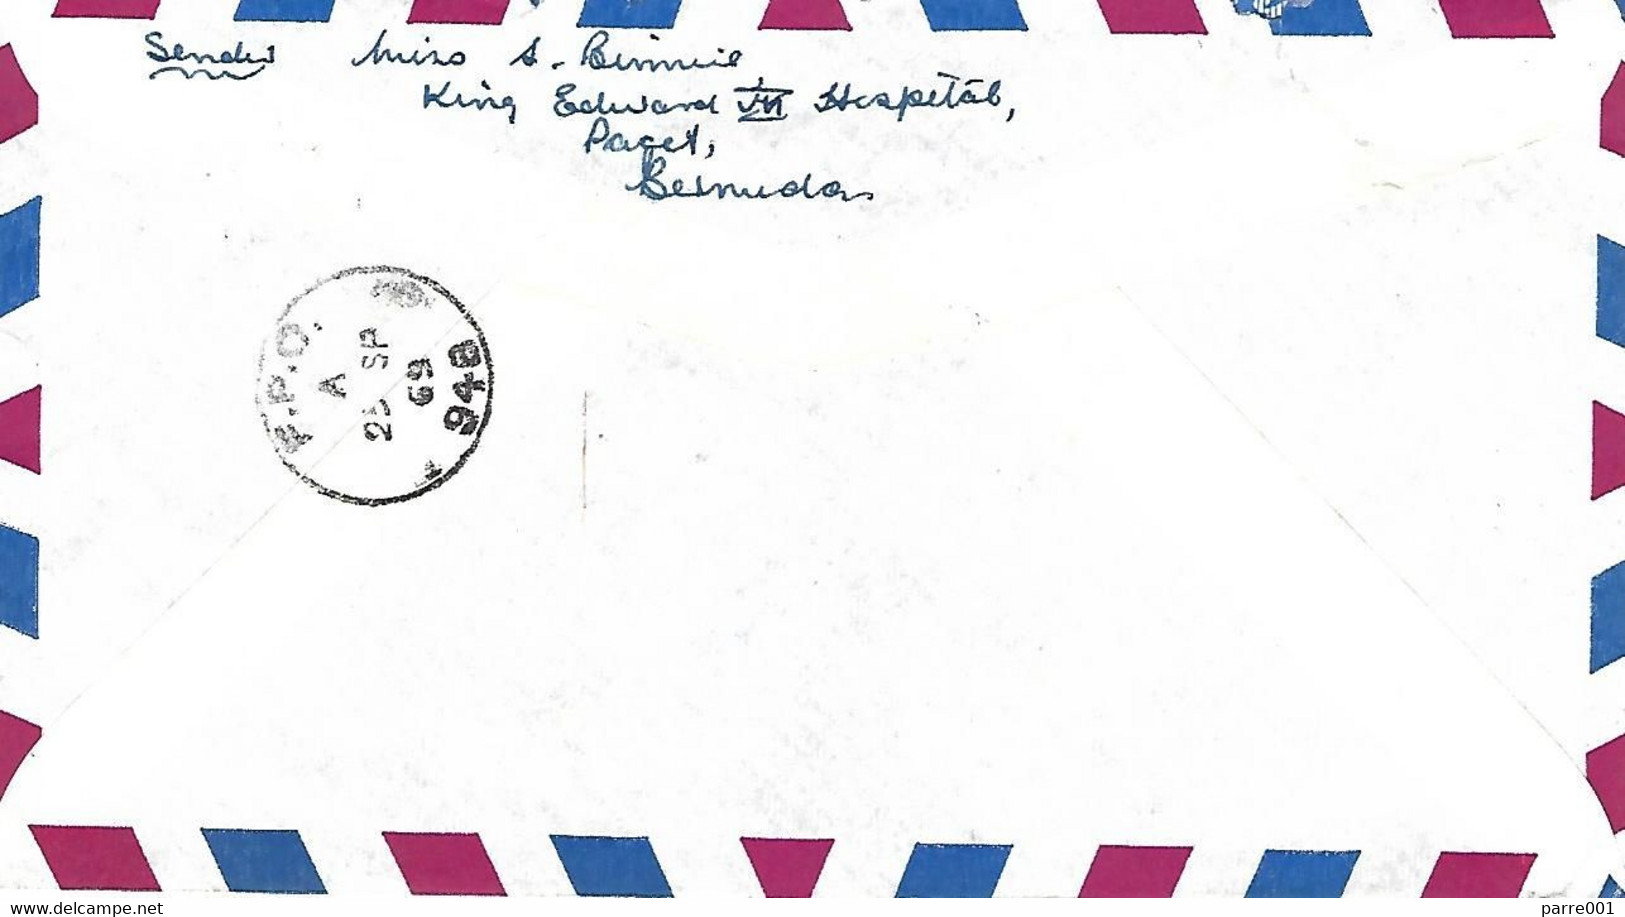 Bermuda 1974 FPO 948 BFPO1 Kowloon 40 Postal Courrier Communications Unit Royal Engineers Forces Official Cover - Lettres & Documents